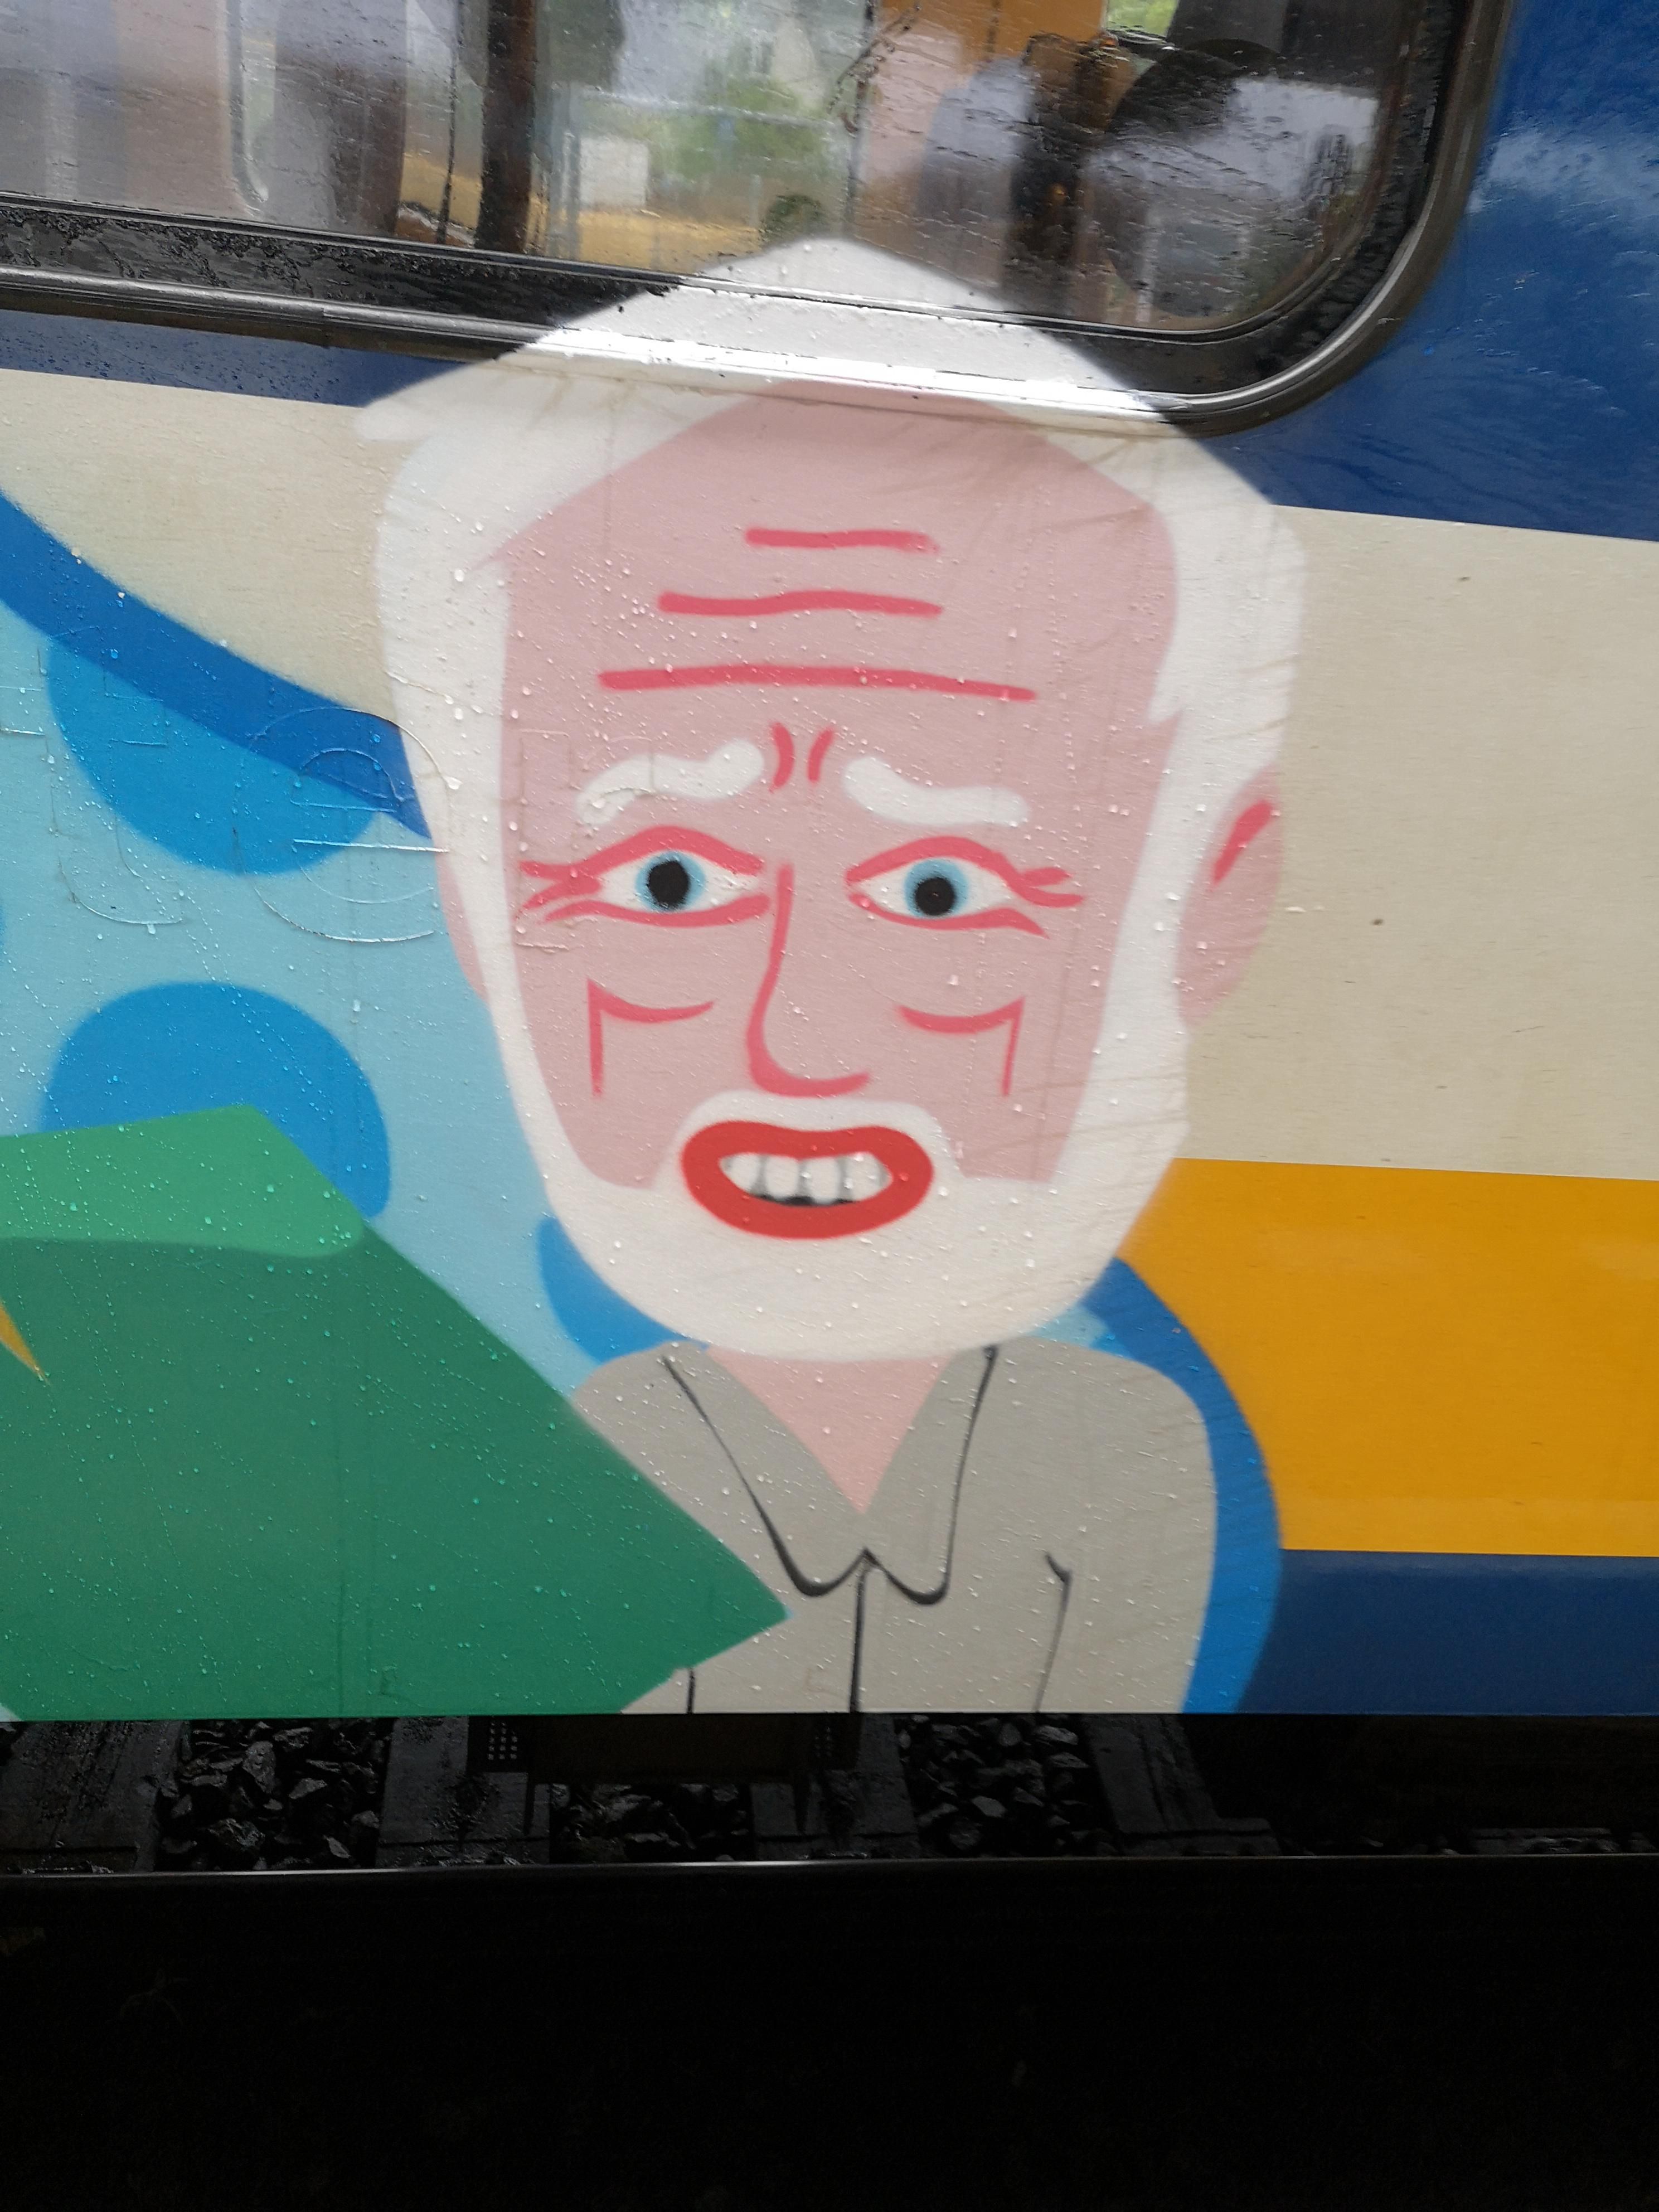 So I saw this familiar face on daily commute in the Netherlands